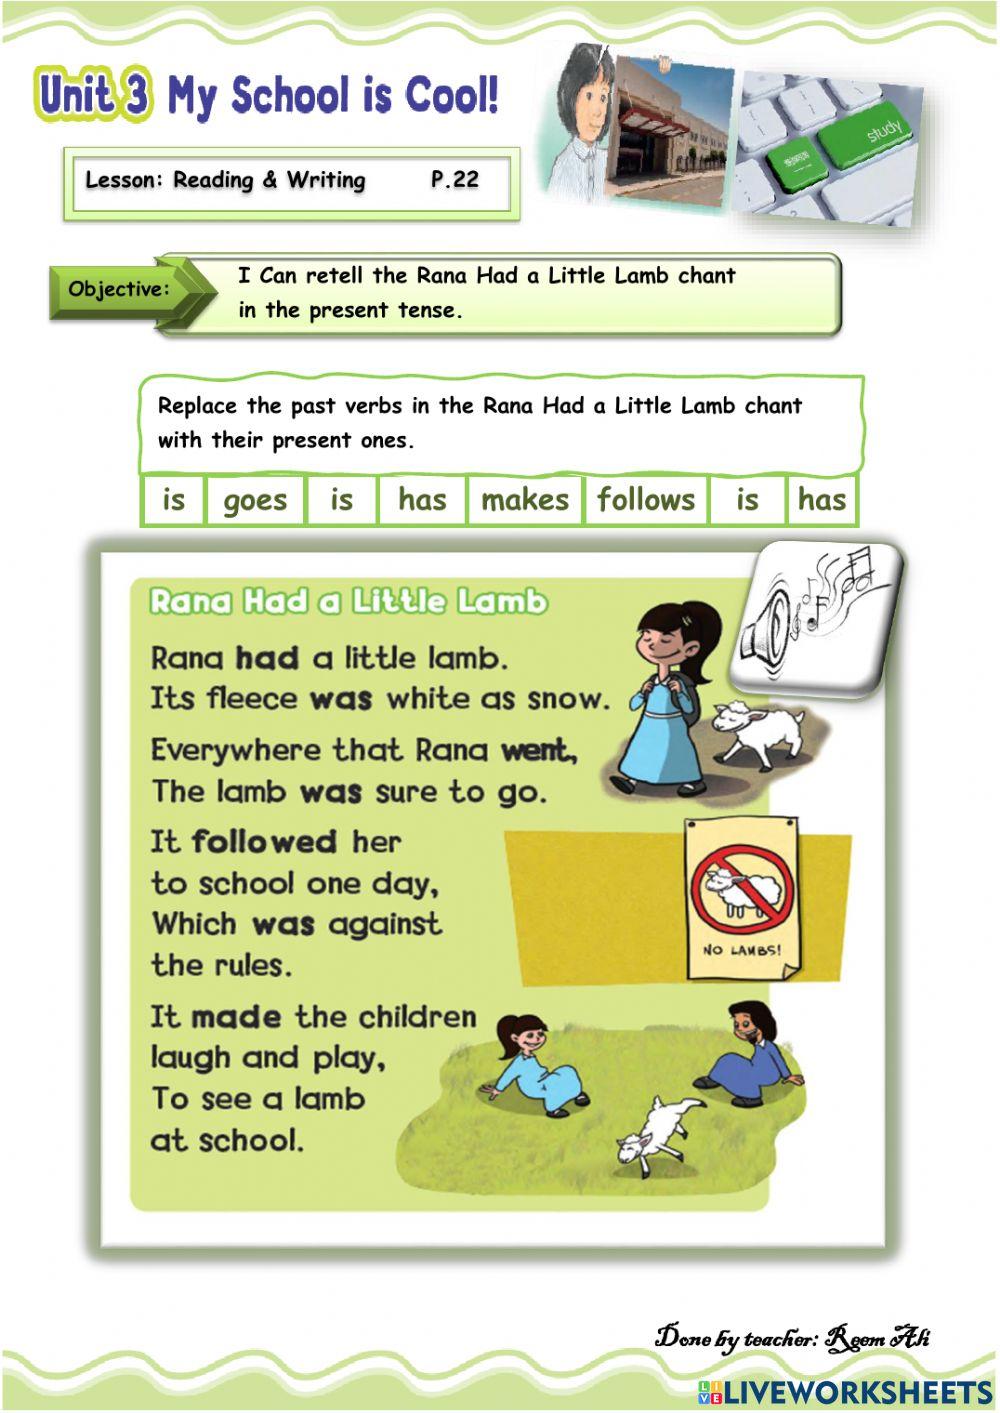 We Can6 U3 L3 I Can retell  the Rana Had a Little Lamb chant in the present tense.